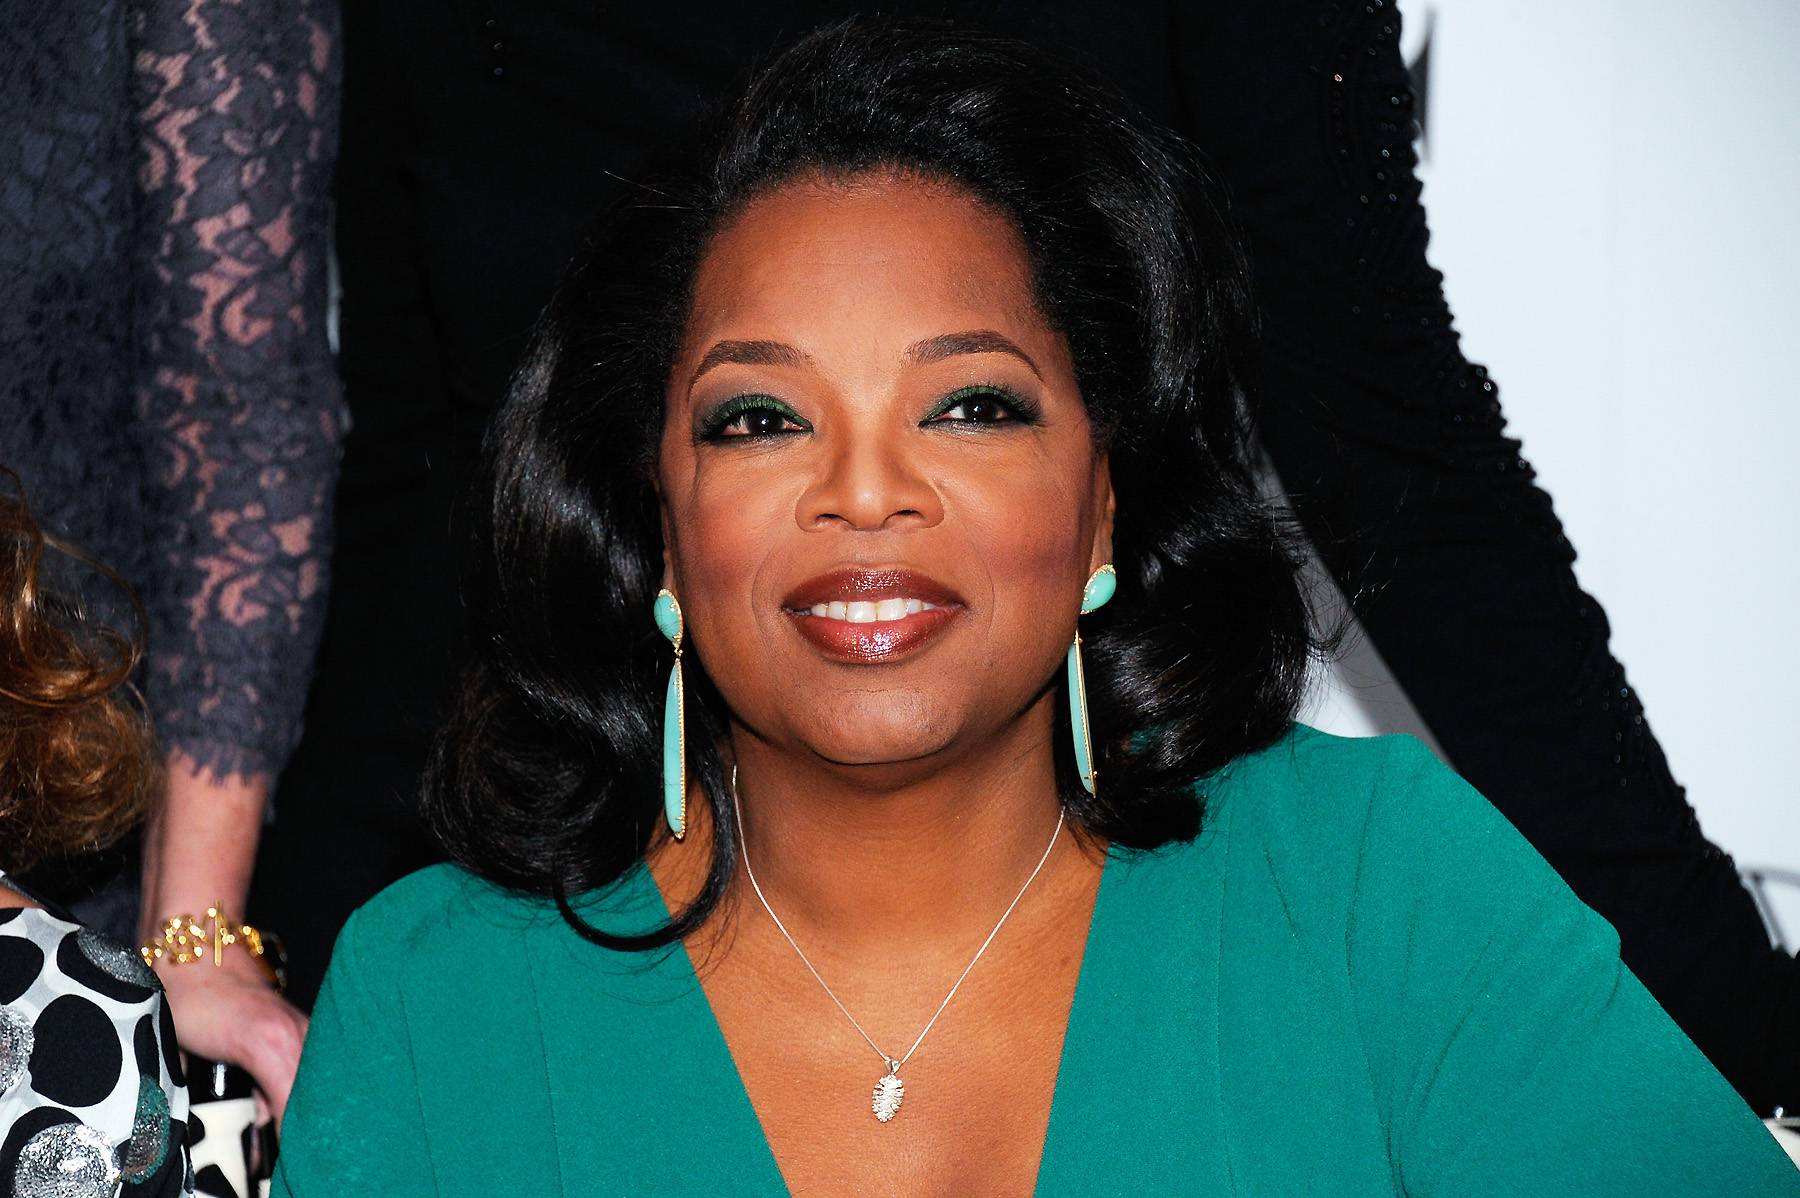 Oprah Winfrey to Deliver Spelman’s Commencement&nbsp;Address - Media mogul and philanthropist Oprah Winfrey will deliver the 2012 commencement address at Spelman College on Sunday, May 20, it was announced last week. The former talk-show host will address the class of approximately 550 students. (Photo: Andrew H. Walker/Getty Images)